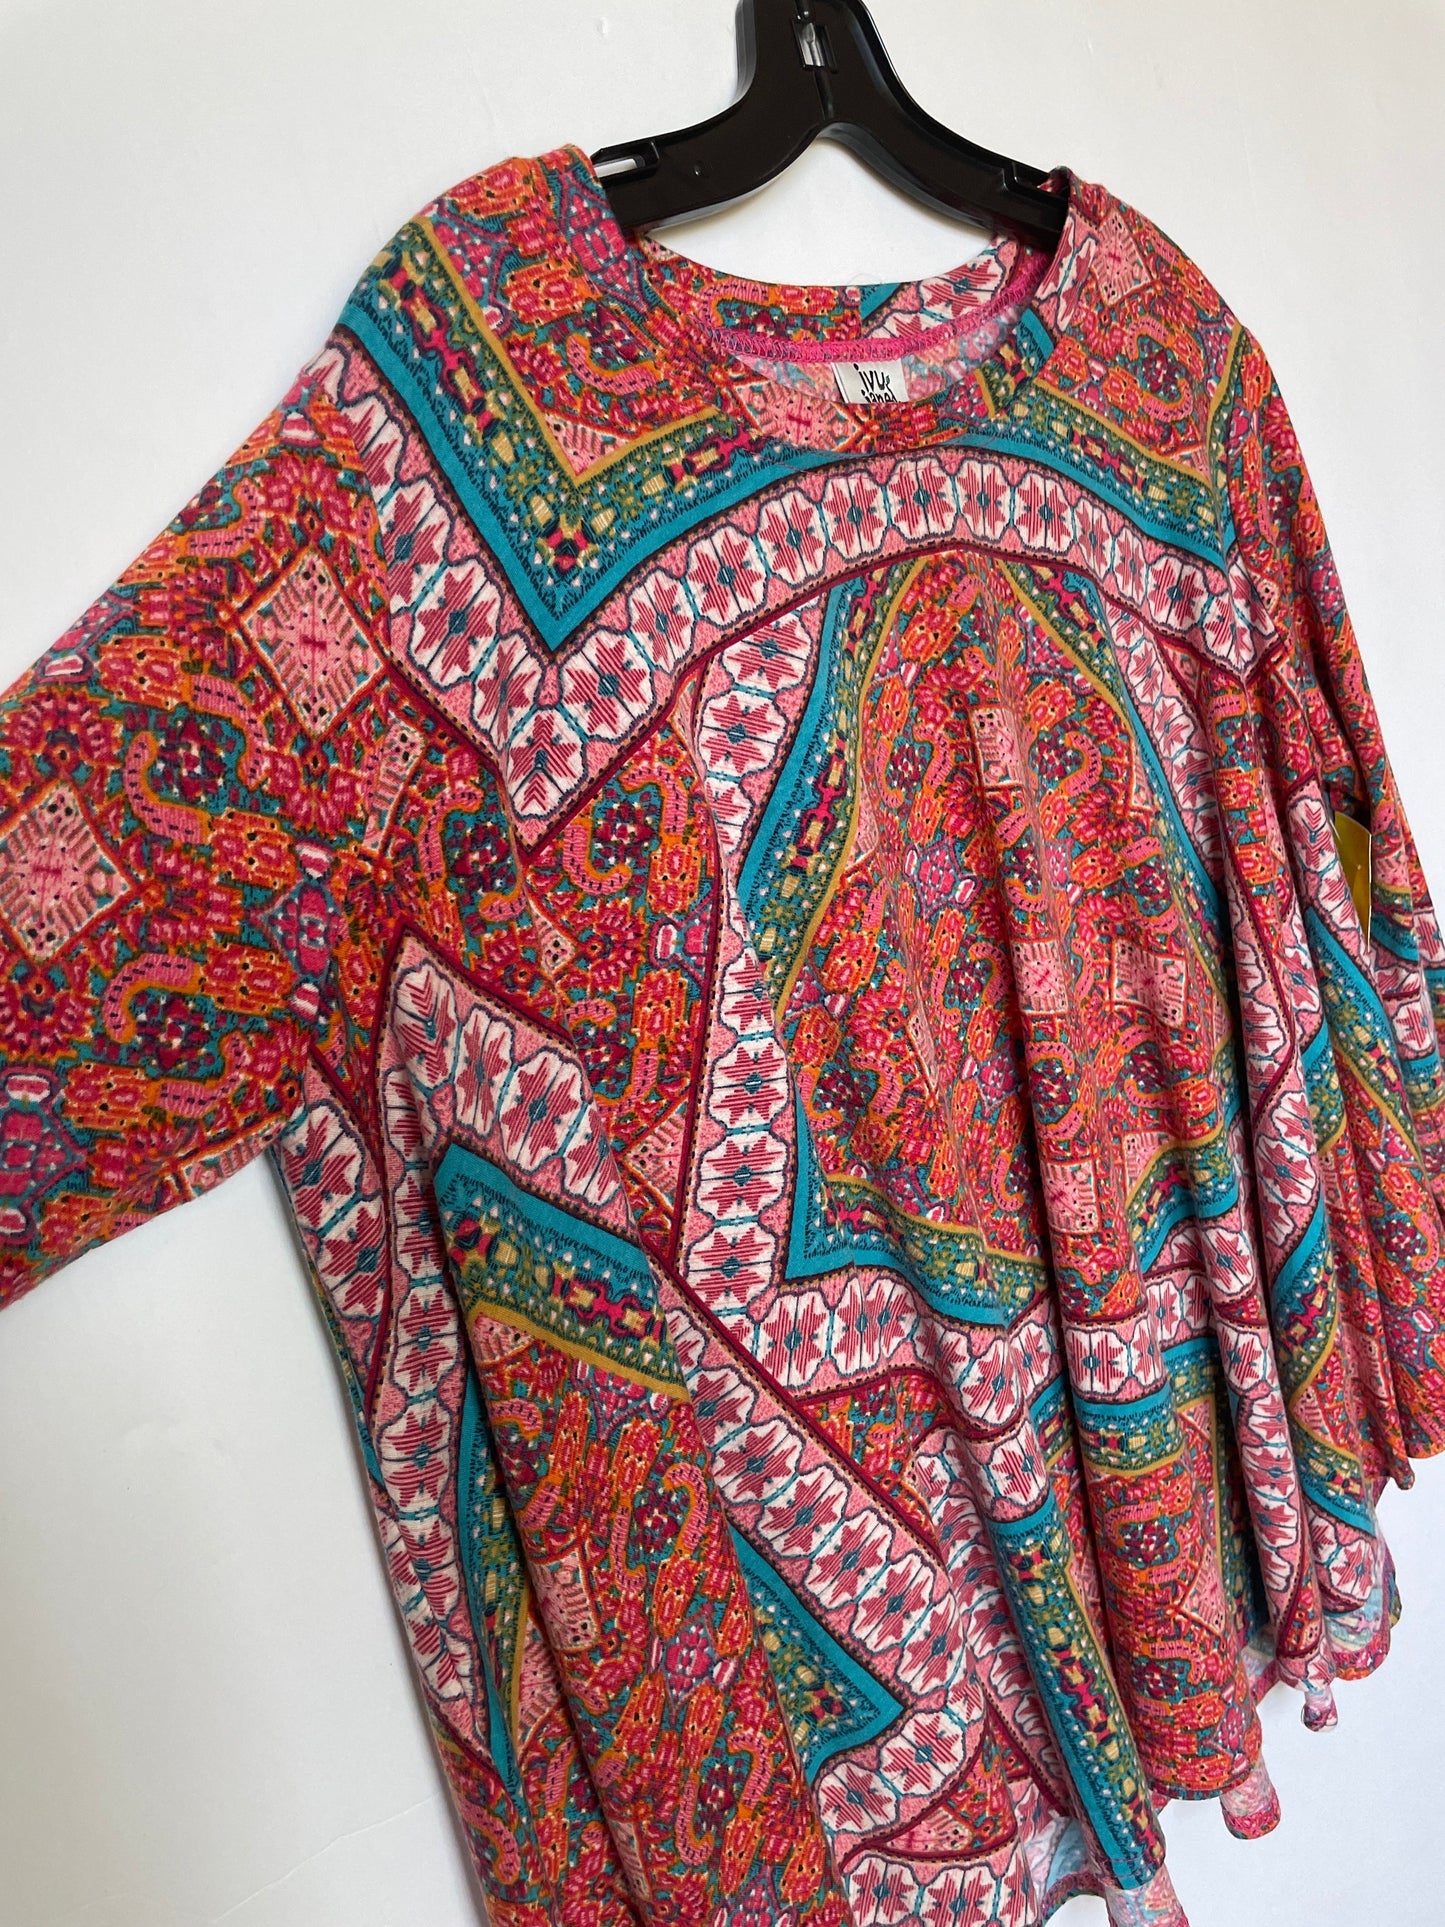 Multi-colored Top Long Sleeve Ivy Jane, Size S